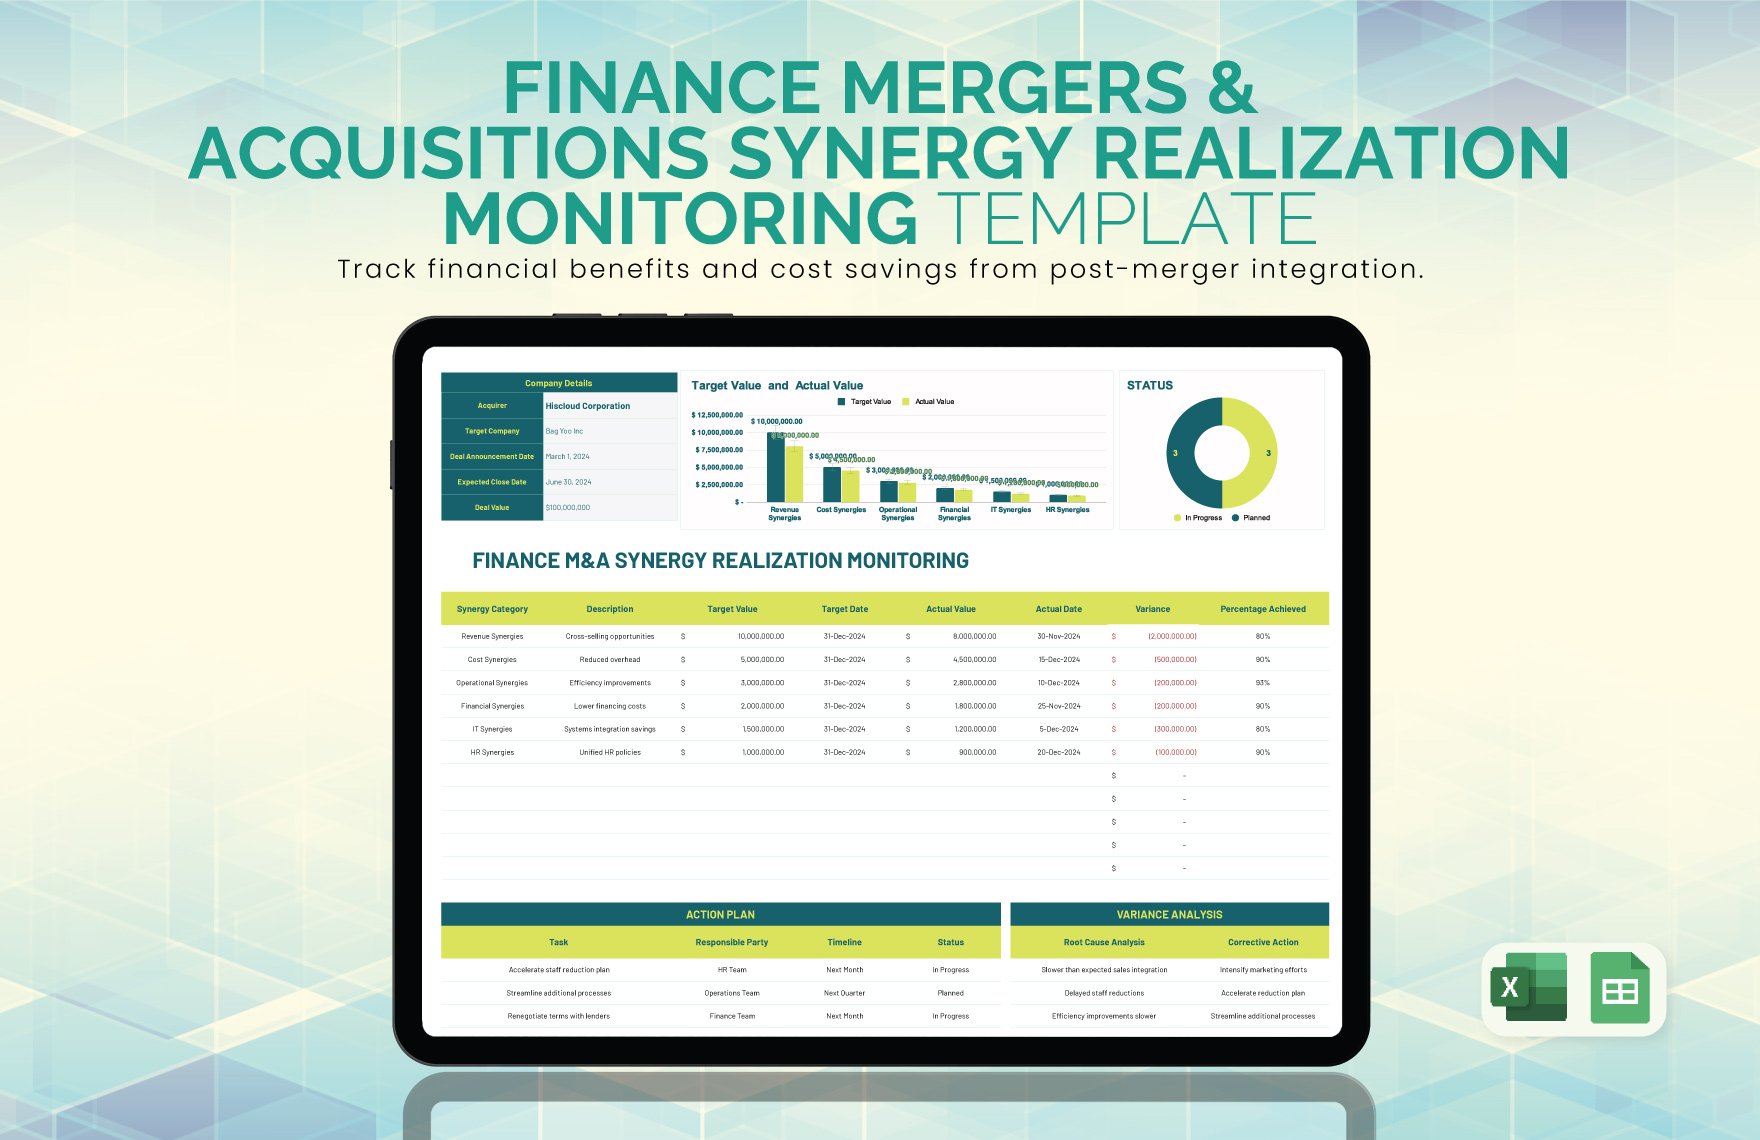 Finance Mergers & Acquisitions Synergy Realization Monitoring Template